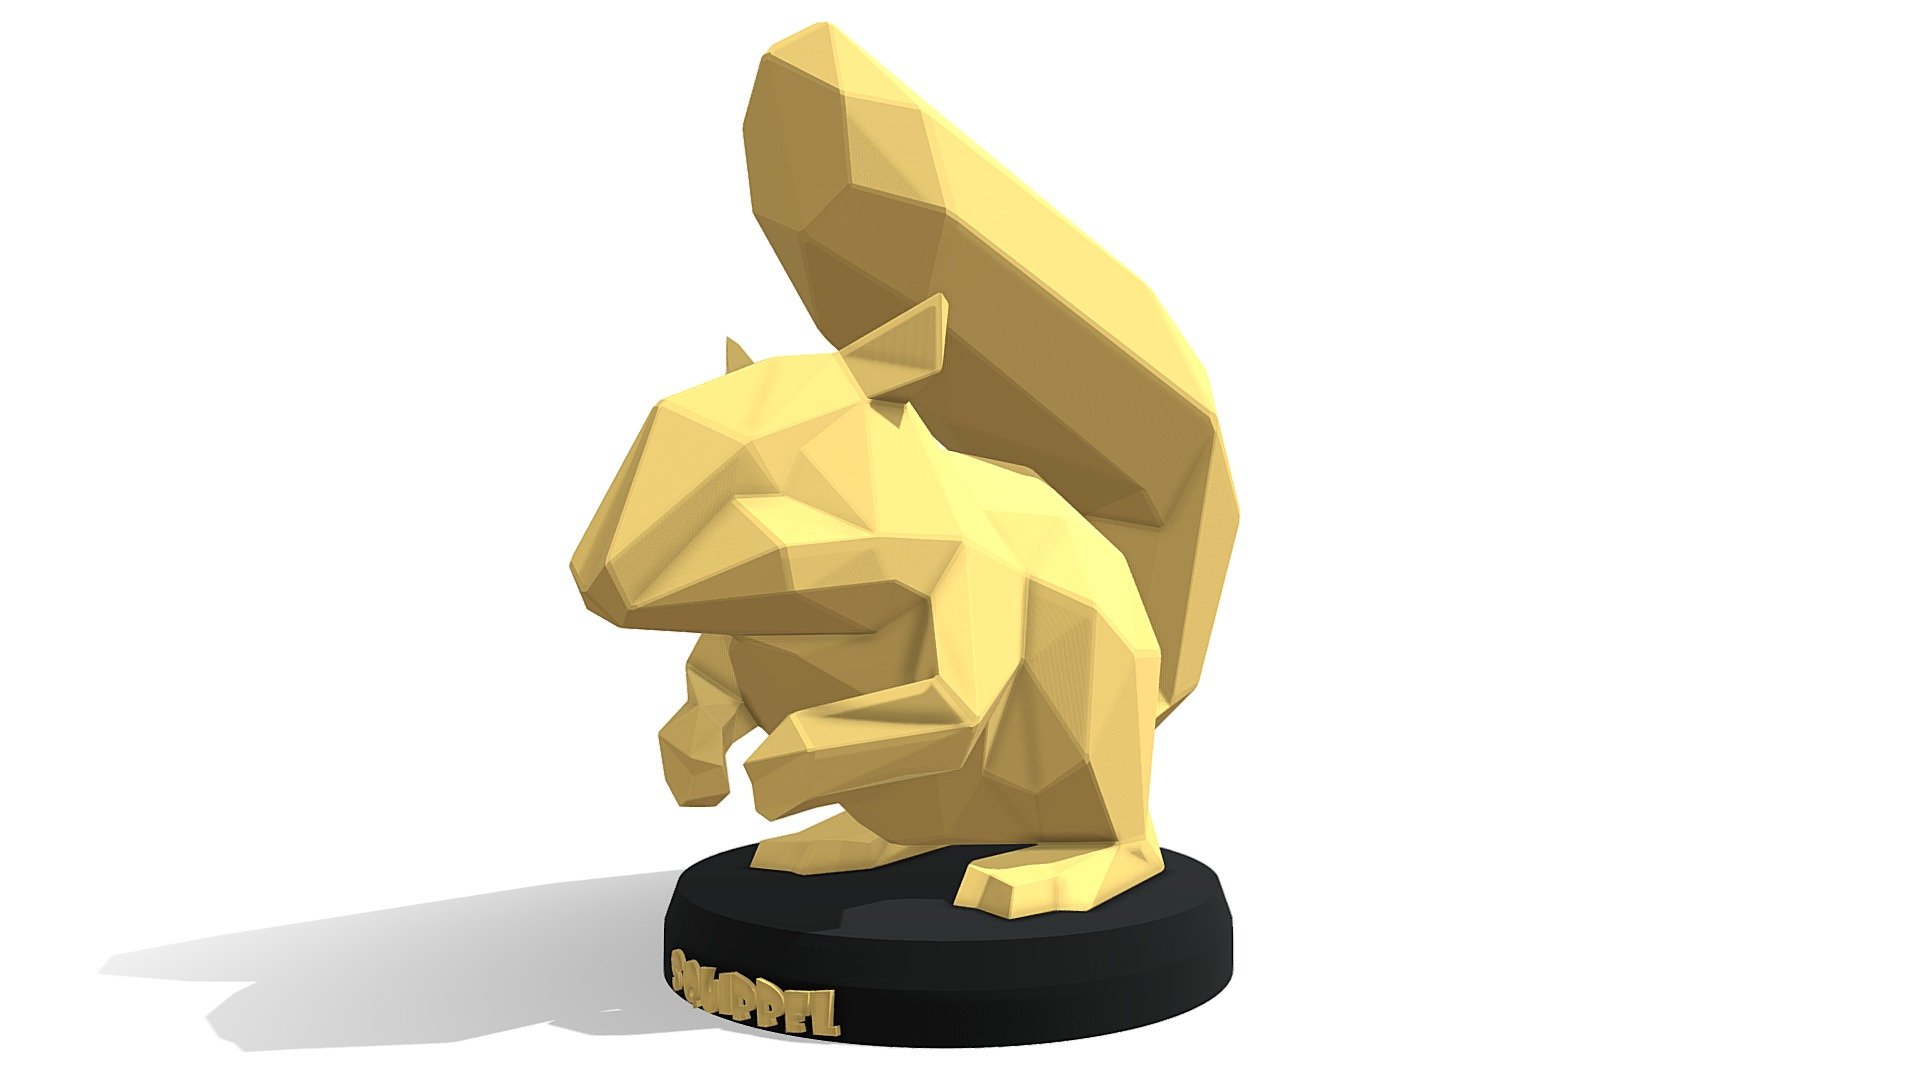 Polygonal 3D Model with Parametric modeling with gold material, make it recommend for :




Basic modeling 

Rigging 

sculpting 

Become Statue

Decorate

3D Print File

Toy

Have fun  :) - Poly Squirrel - Buy Royalty Free 3D model by Puppy3D 3d model